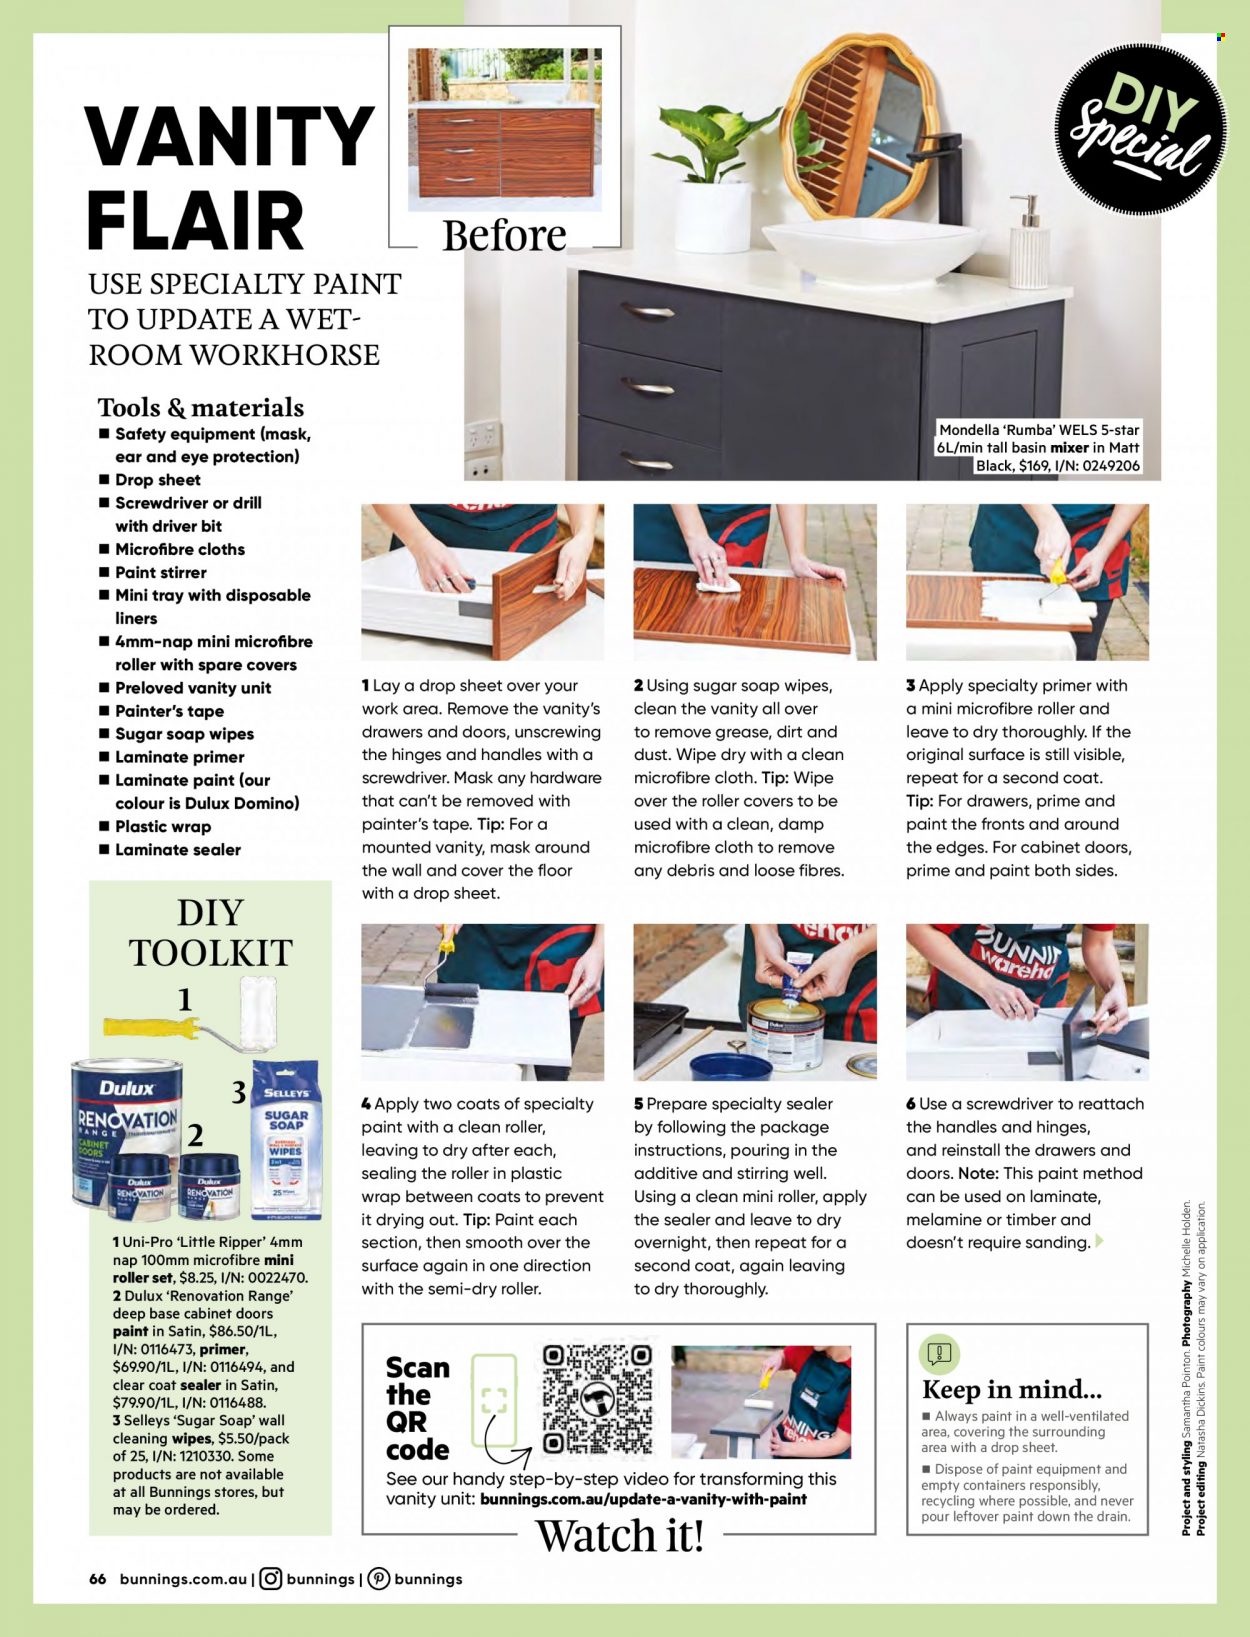 thumbnail - Bunnings Warehouse Catalogue - Sales products - basin mixer, cabinet, vanity, roller, plastic drop sheet, roller cover, paint, Dulux, screwdriver. Page 66.